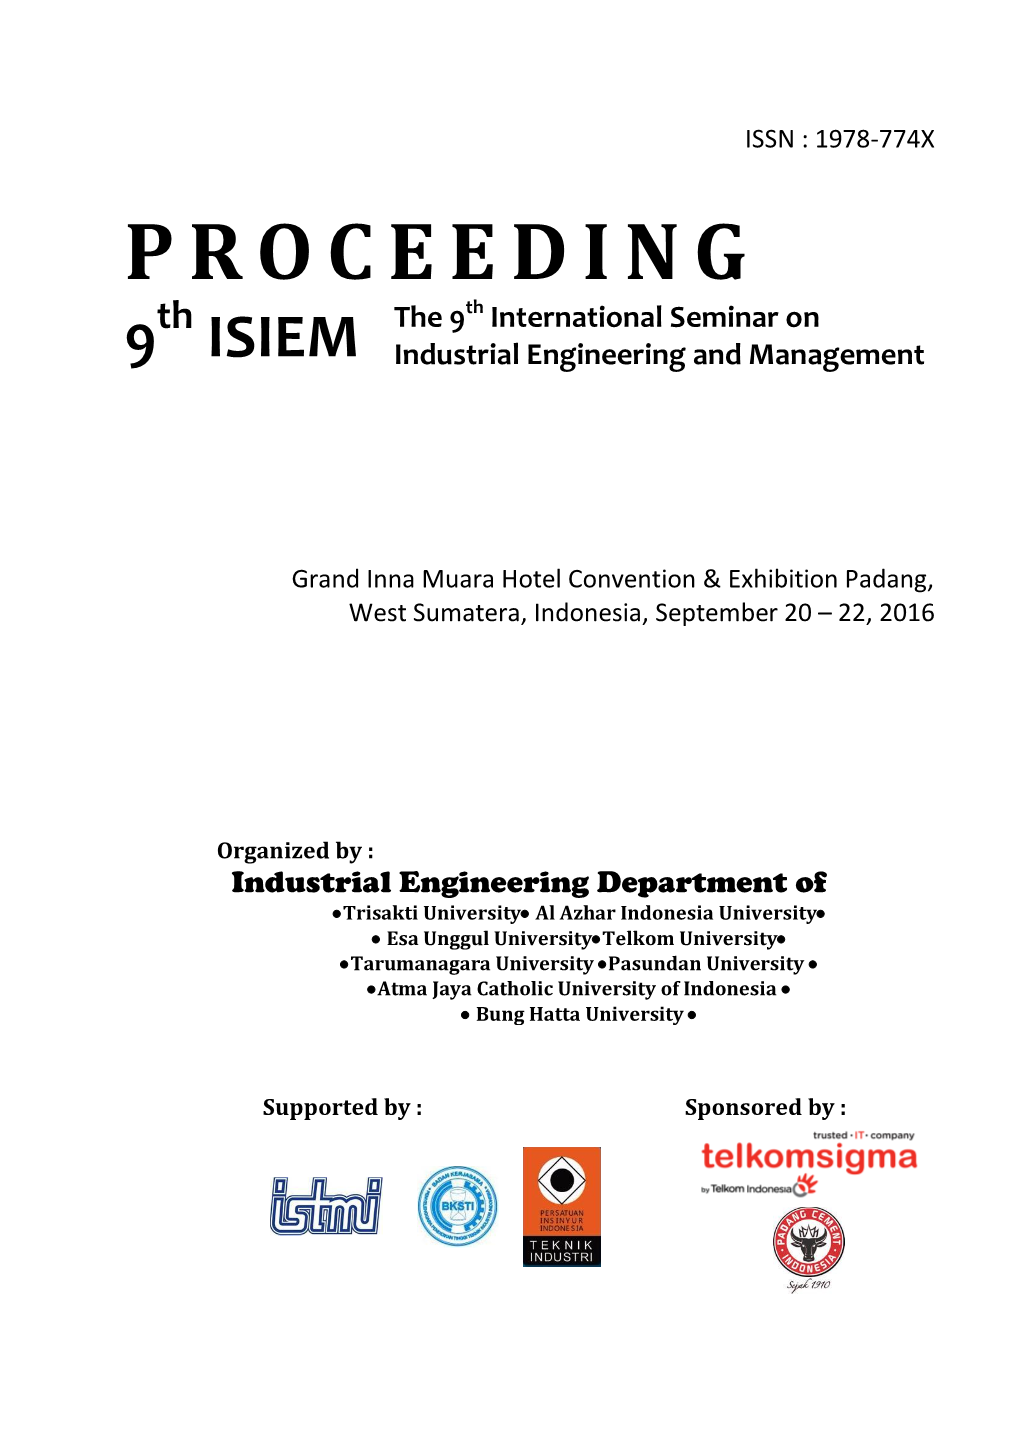 PROCEEDING Th the 9Th International Seminar on 9 ISIEM Industrial Engineering and Management